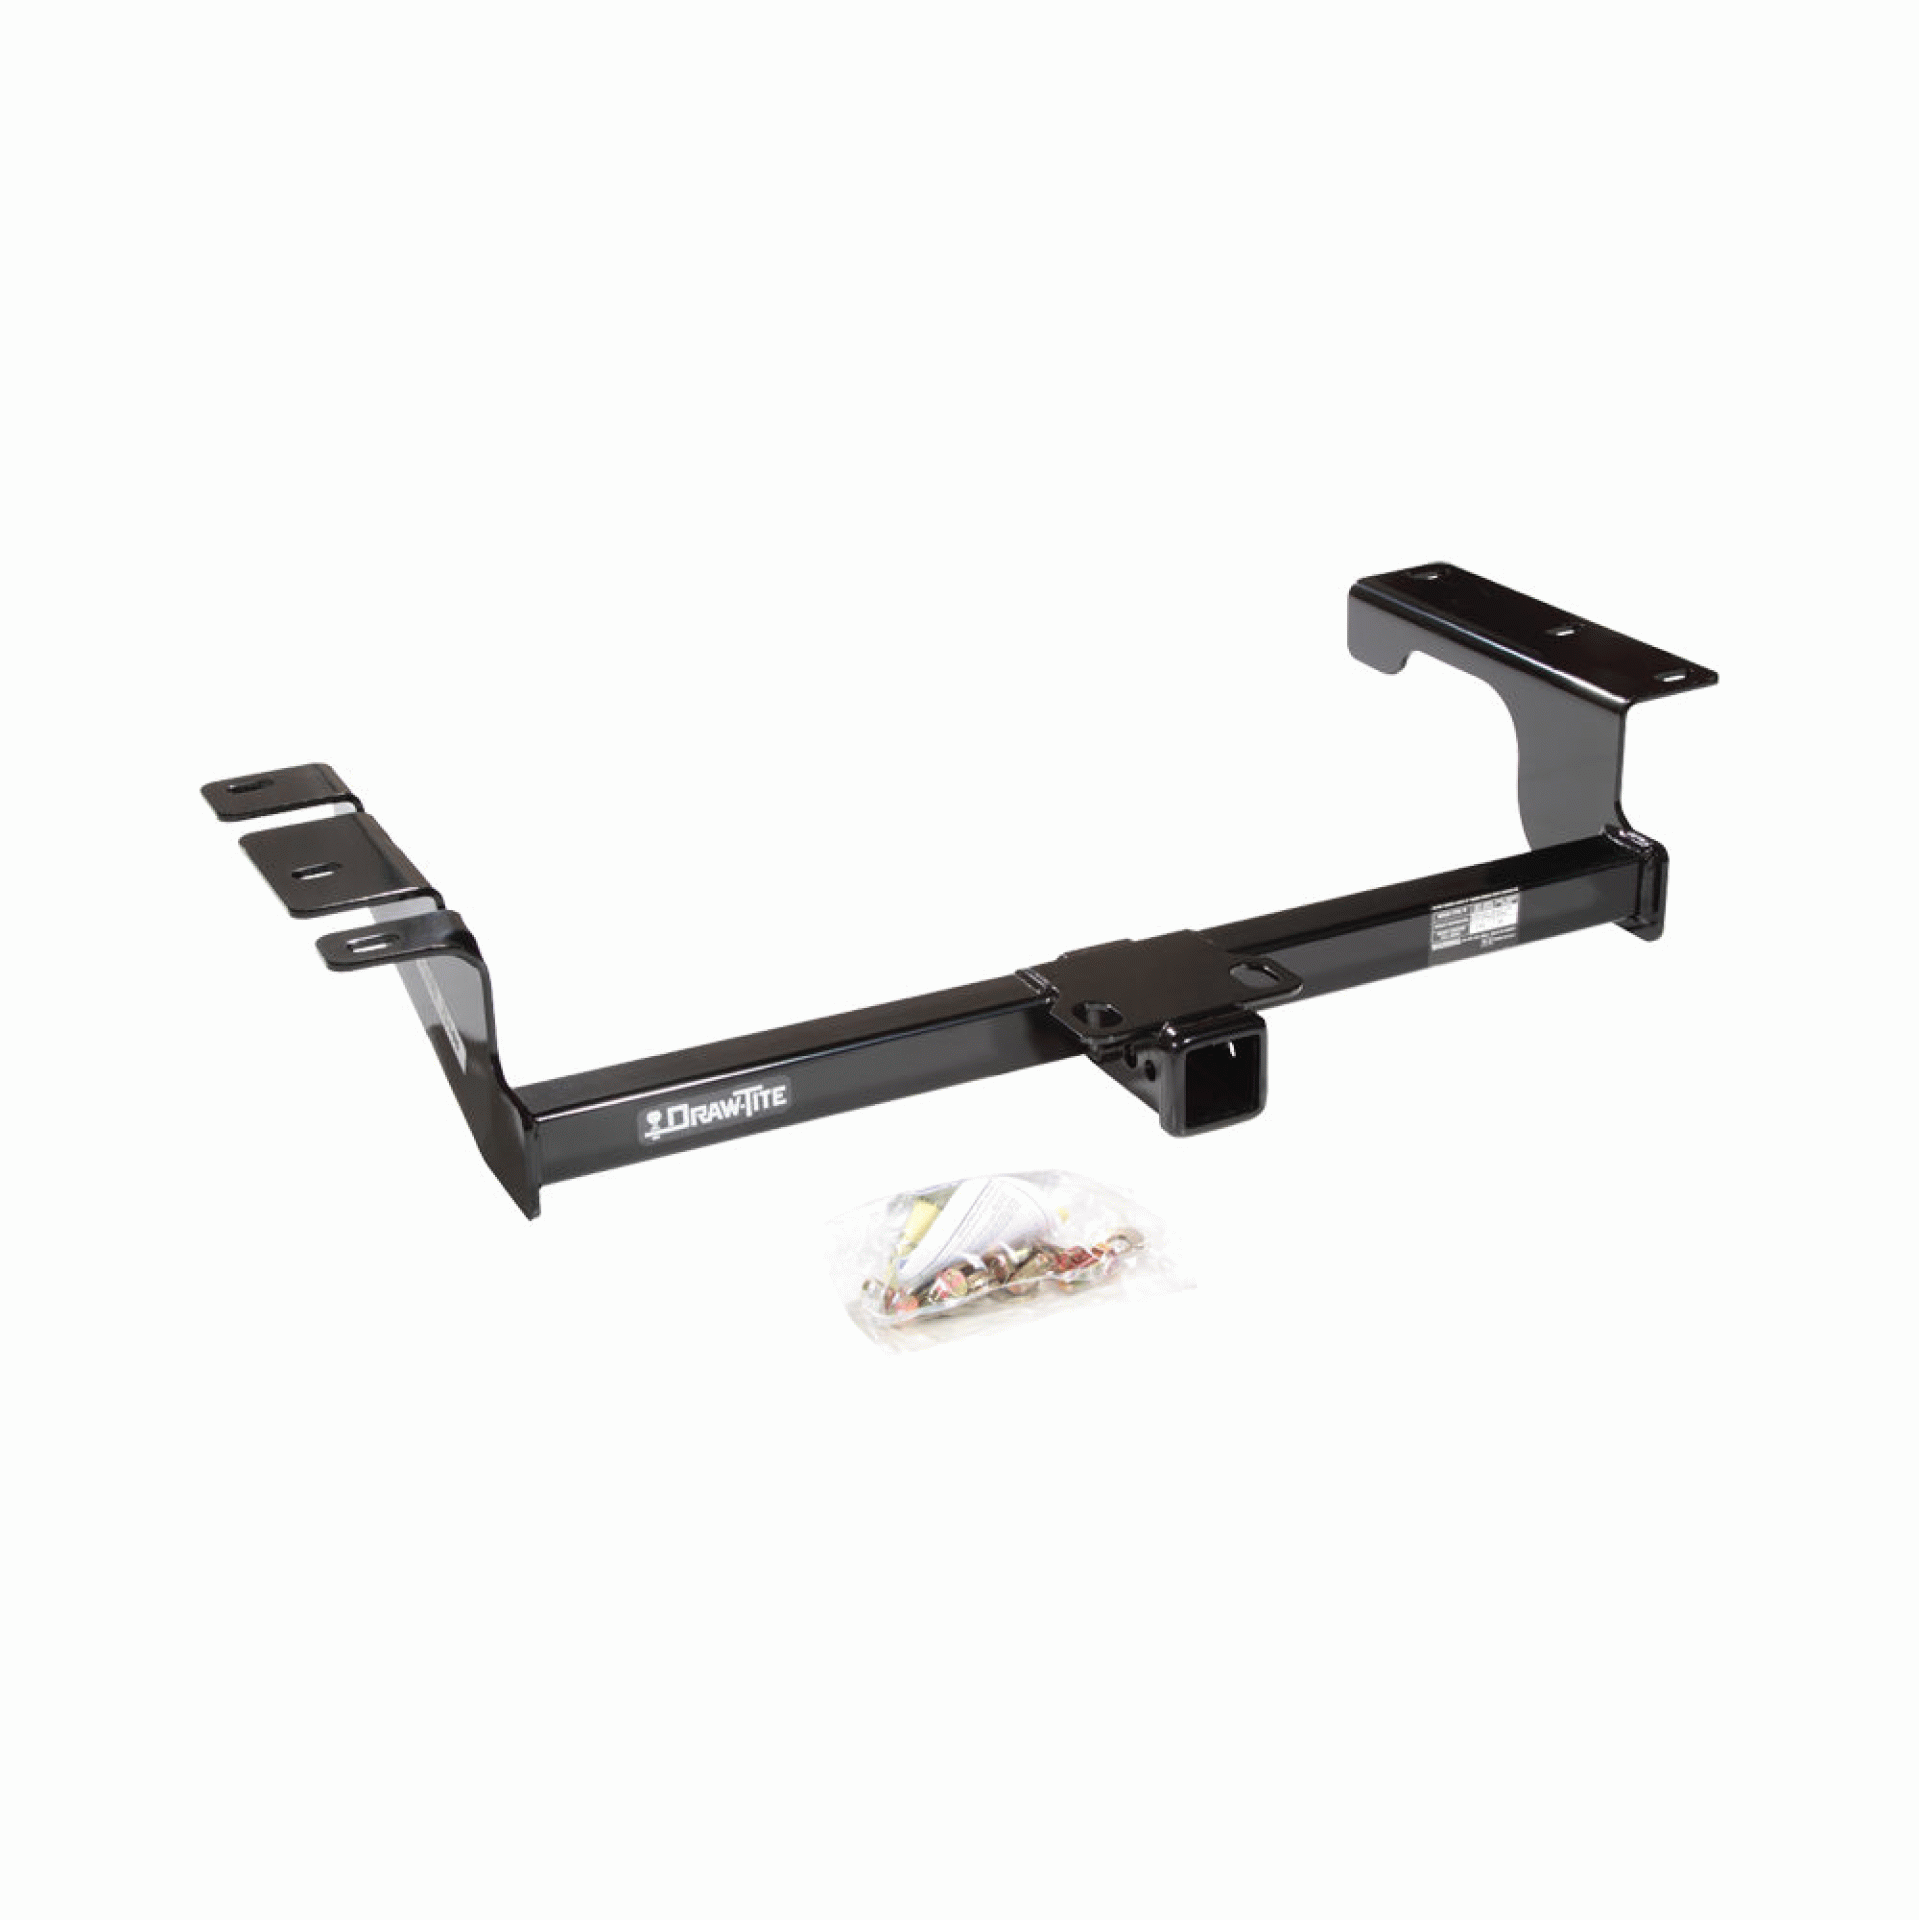 DRAW-TITE | 75148 | HITCH CLASS III REQUIRES 2 INCH REMOVABLE DRAWBAR